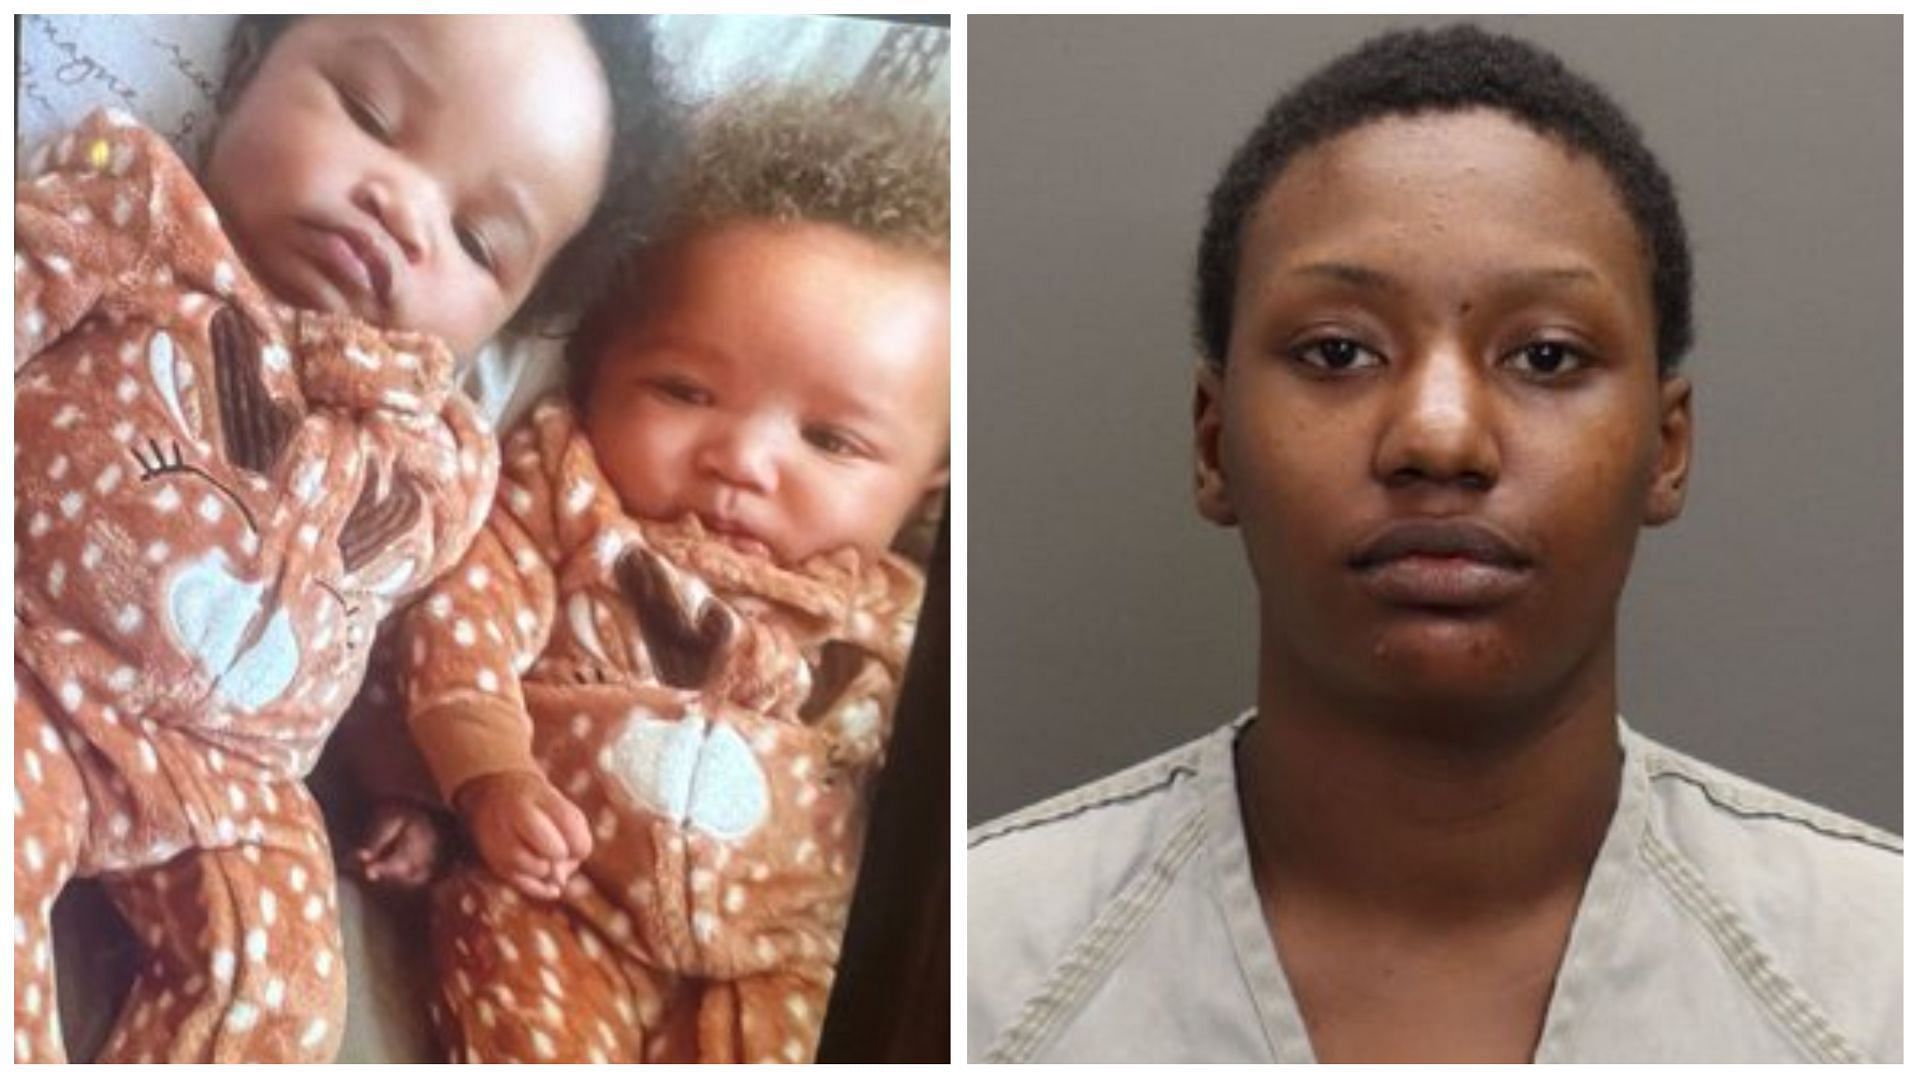 Nalah Jackson (right) stole a car and drove off with Thomas twins (left) in it, (Images via @VLyonsTV/Twitter)